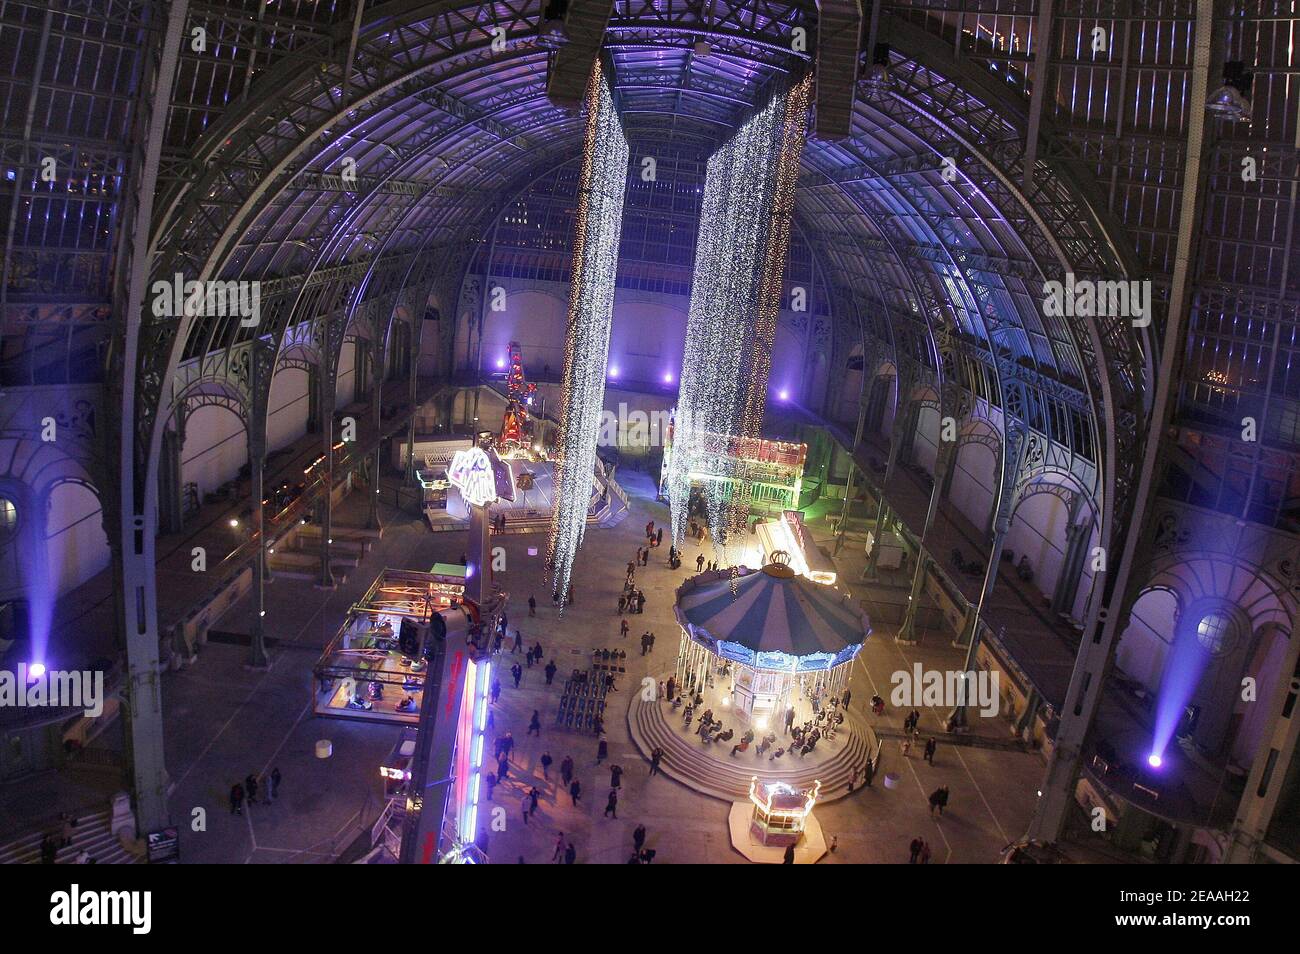 Few fairground attractions and circus are set up inside the Grand Palais for the opening of 'Jours de Fetes' event in Paris, France on December 14, 2005. ( 15 dec-02 jan) Photo by Mehdi Taamallah/ABACAPRESS.COM Stock Photo